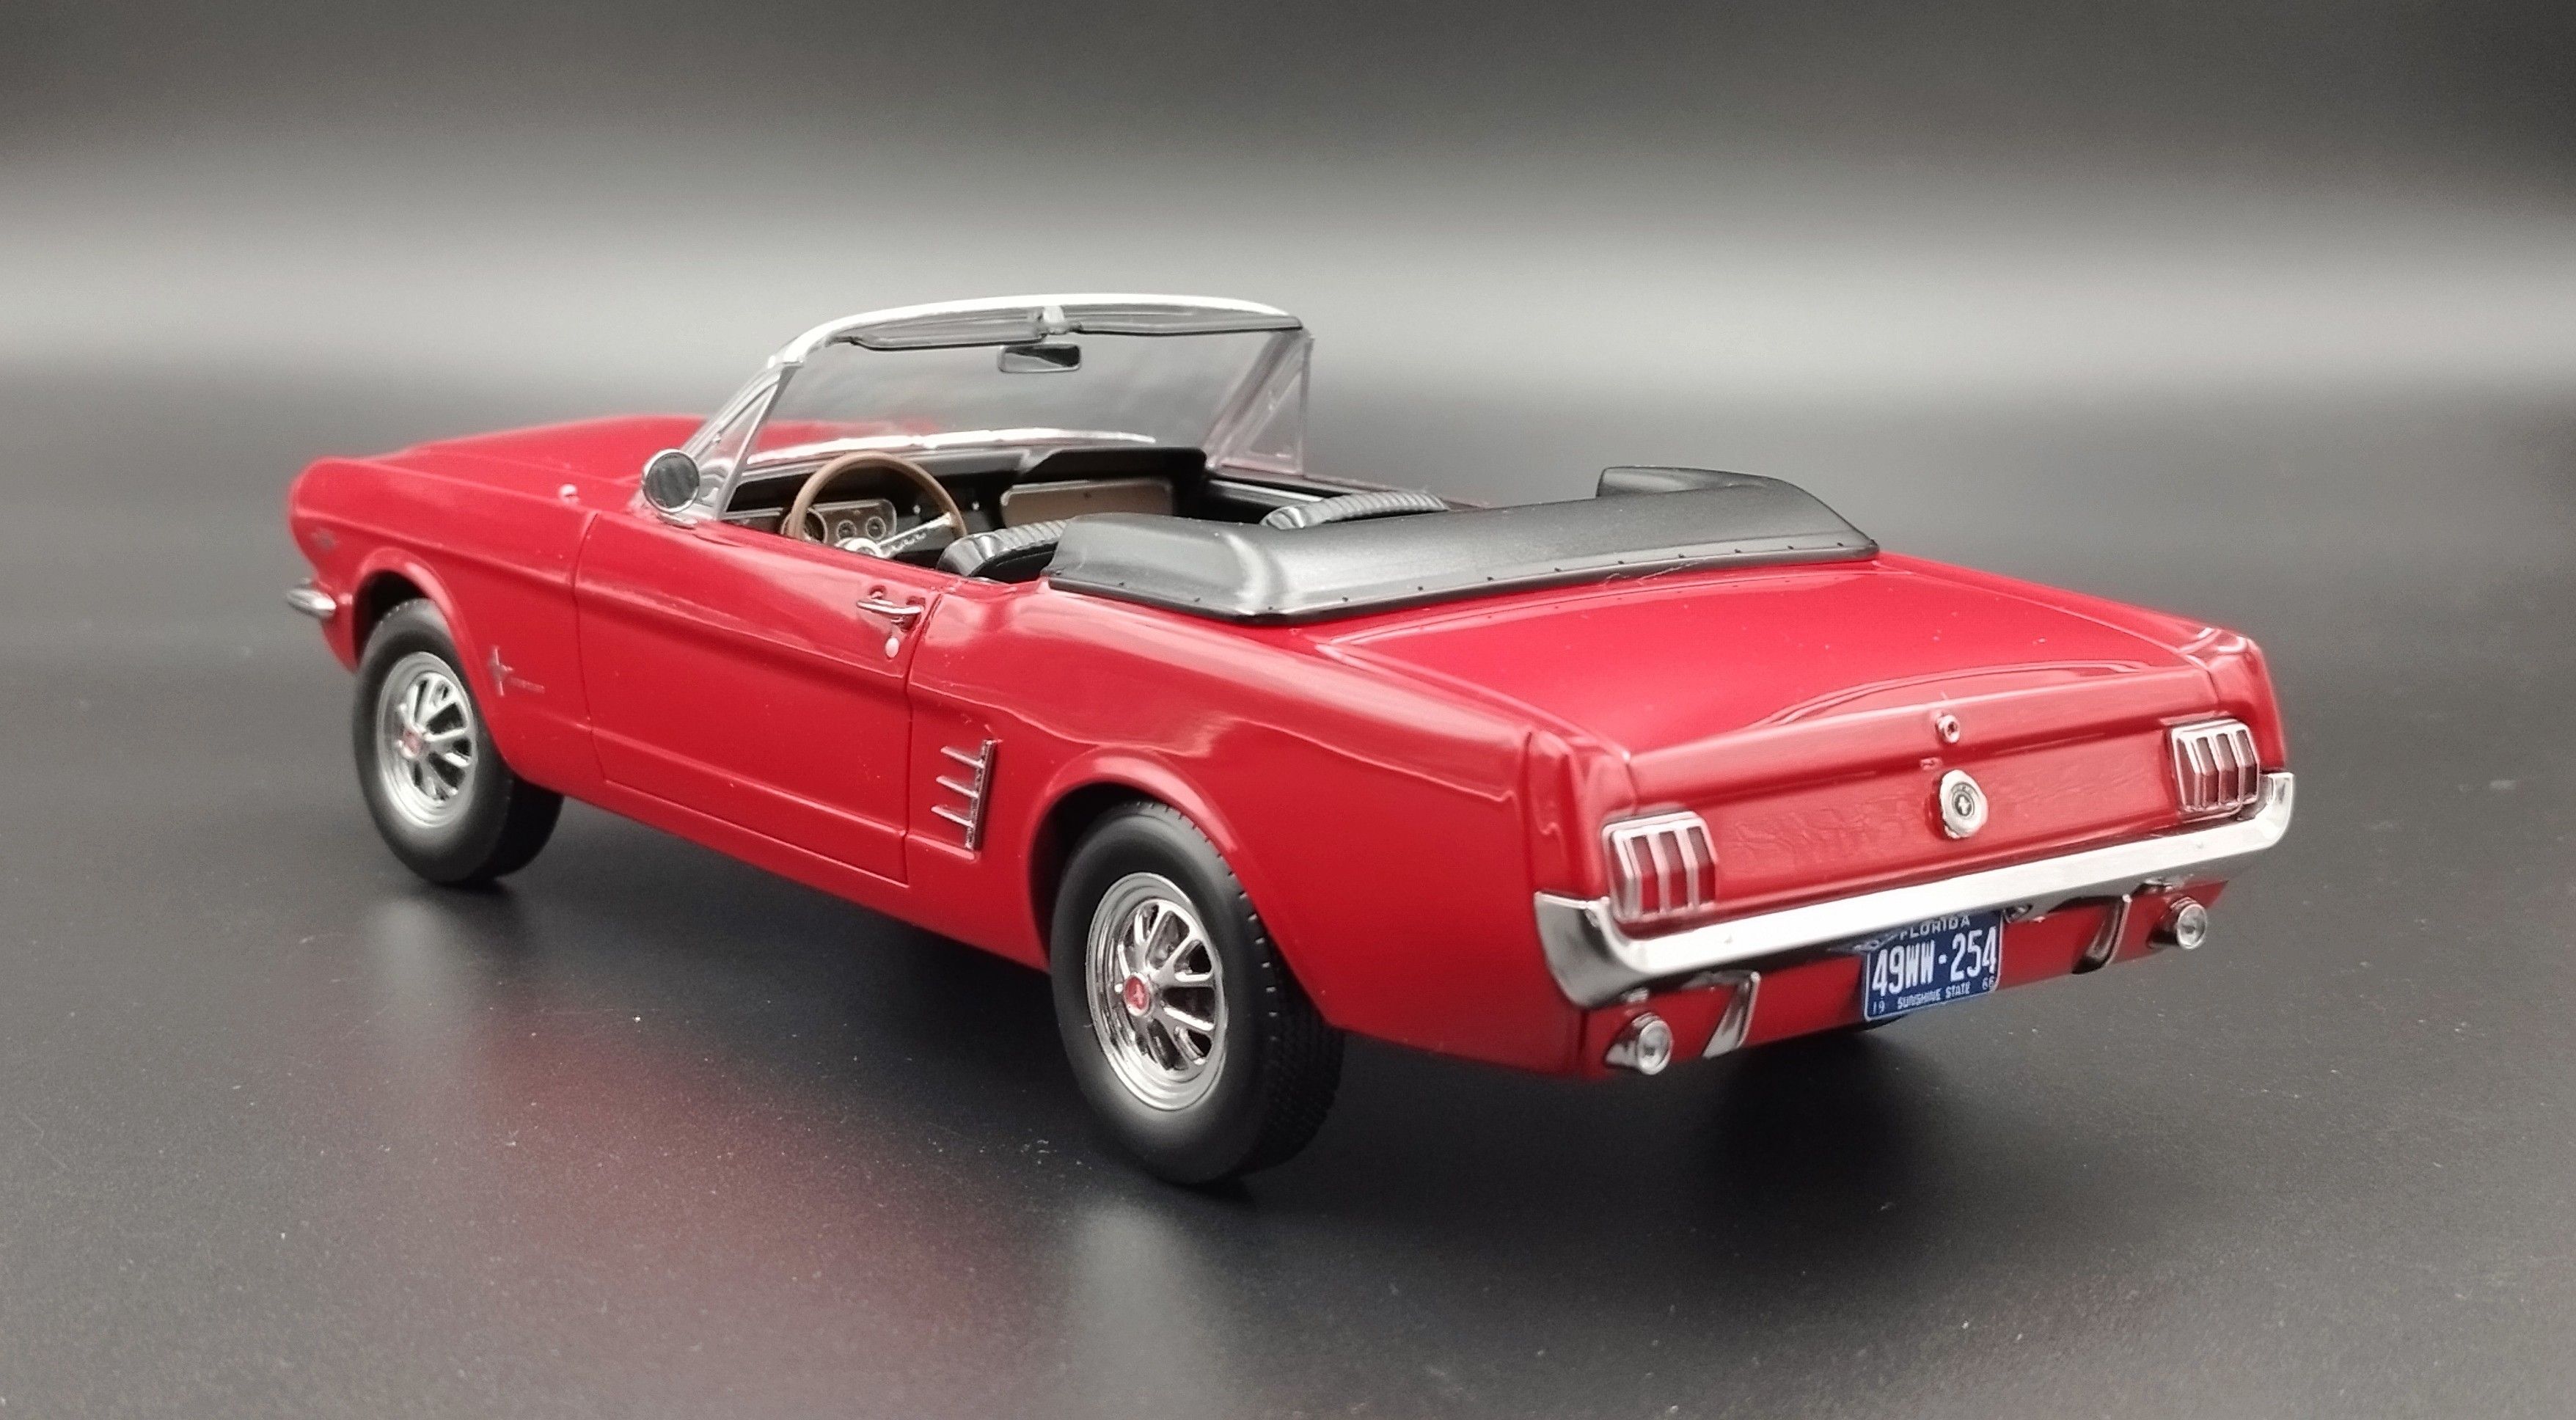 1:18 Norerv 1965 Ford Mustang Convertible red model nowy